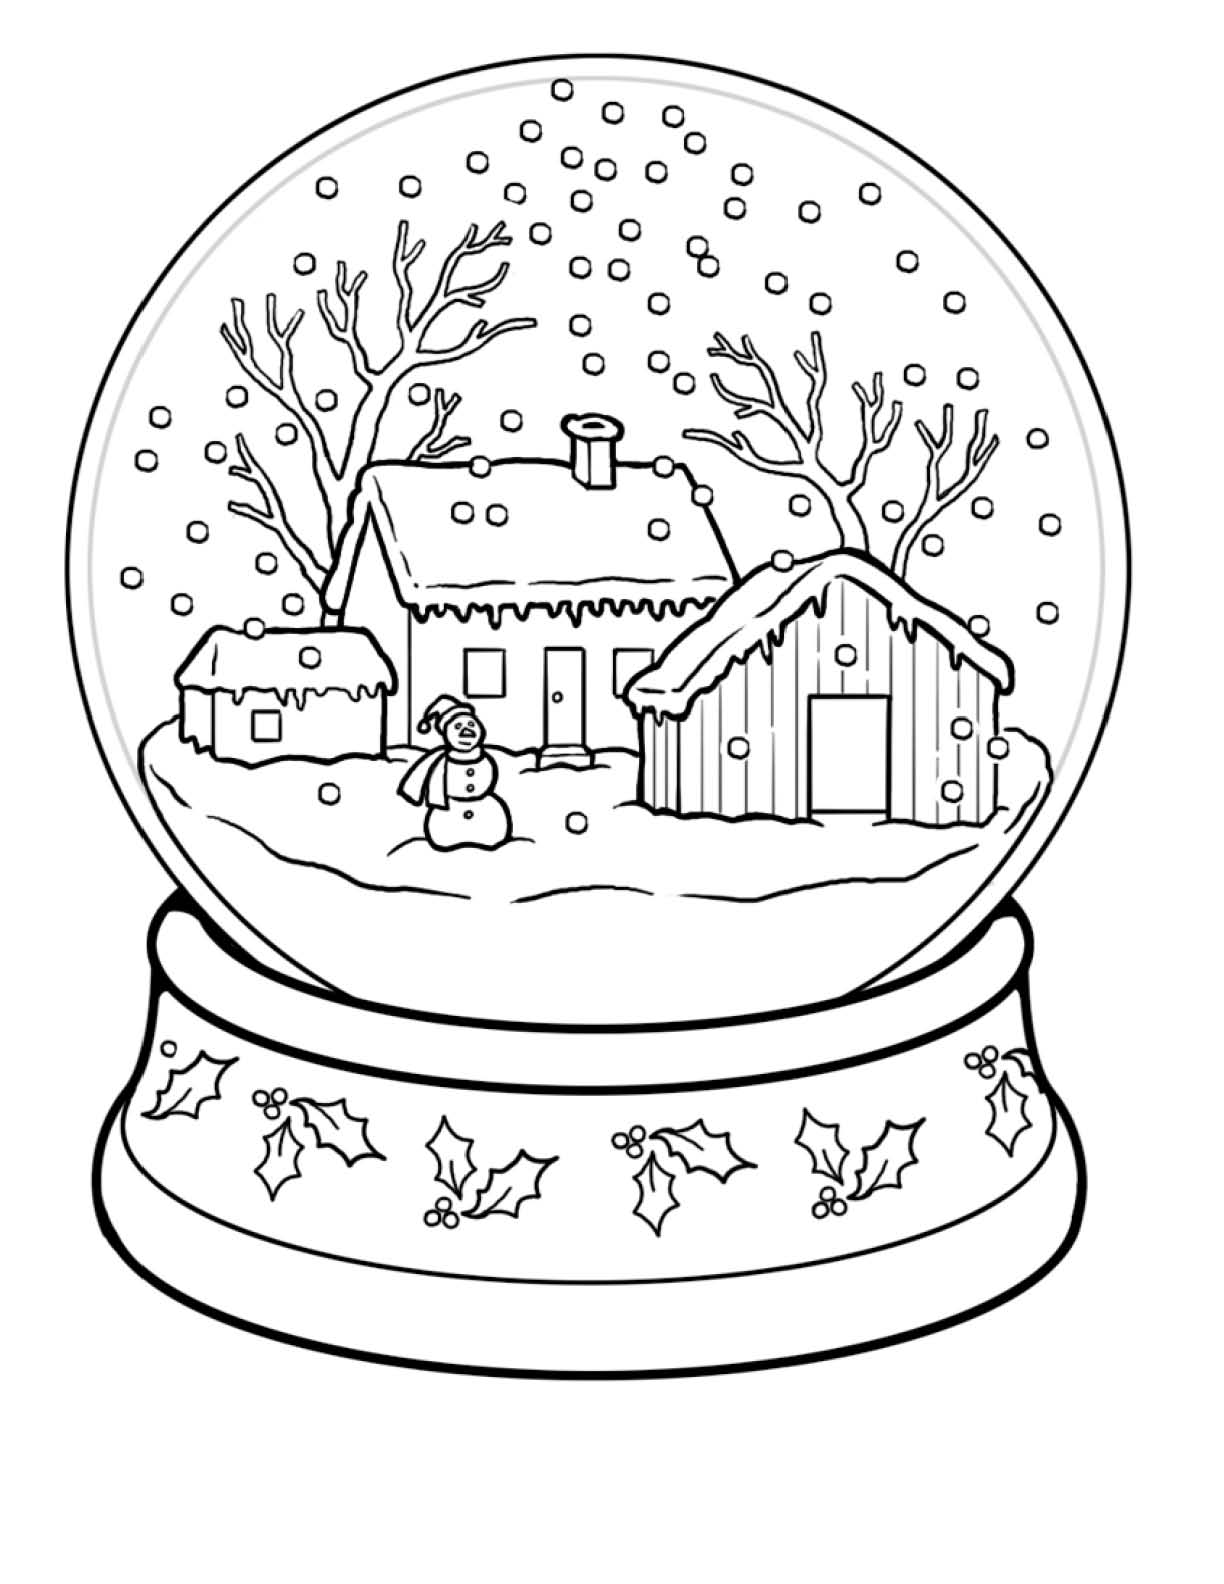 Pin Winter Scene Coloring Page Pages For Kids